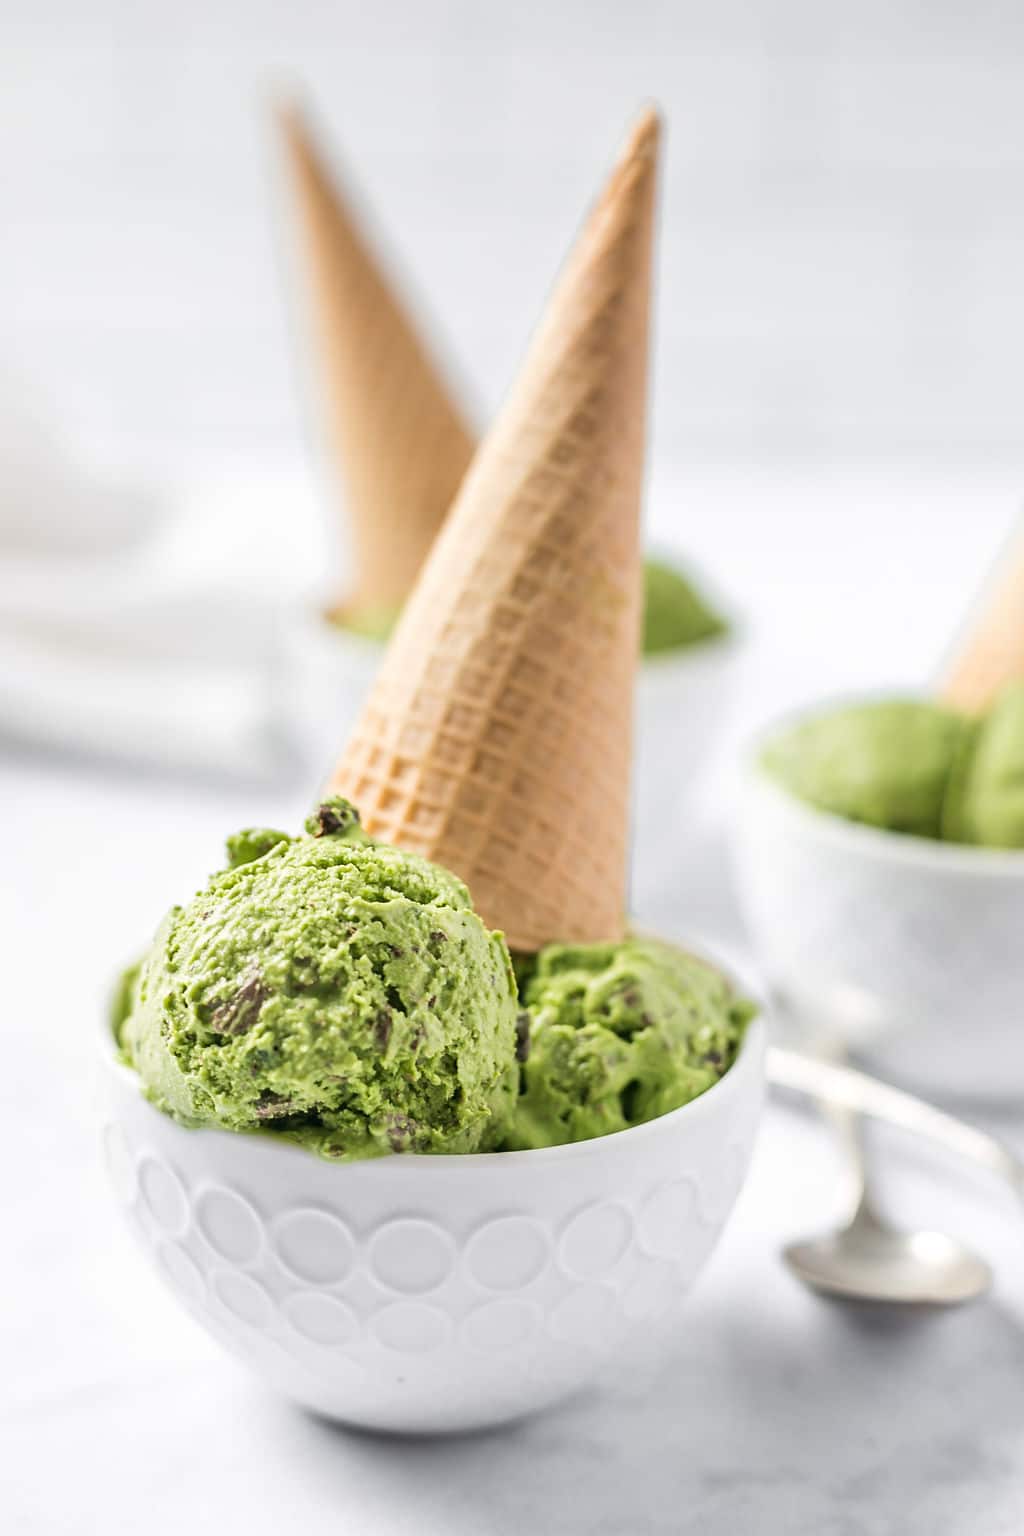 Homemade Matcha Ice Cream With Coconut Milk and Chocolate Chips